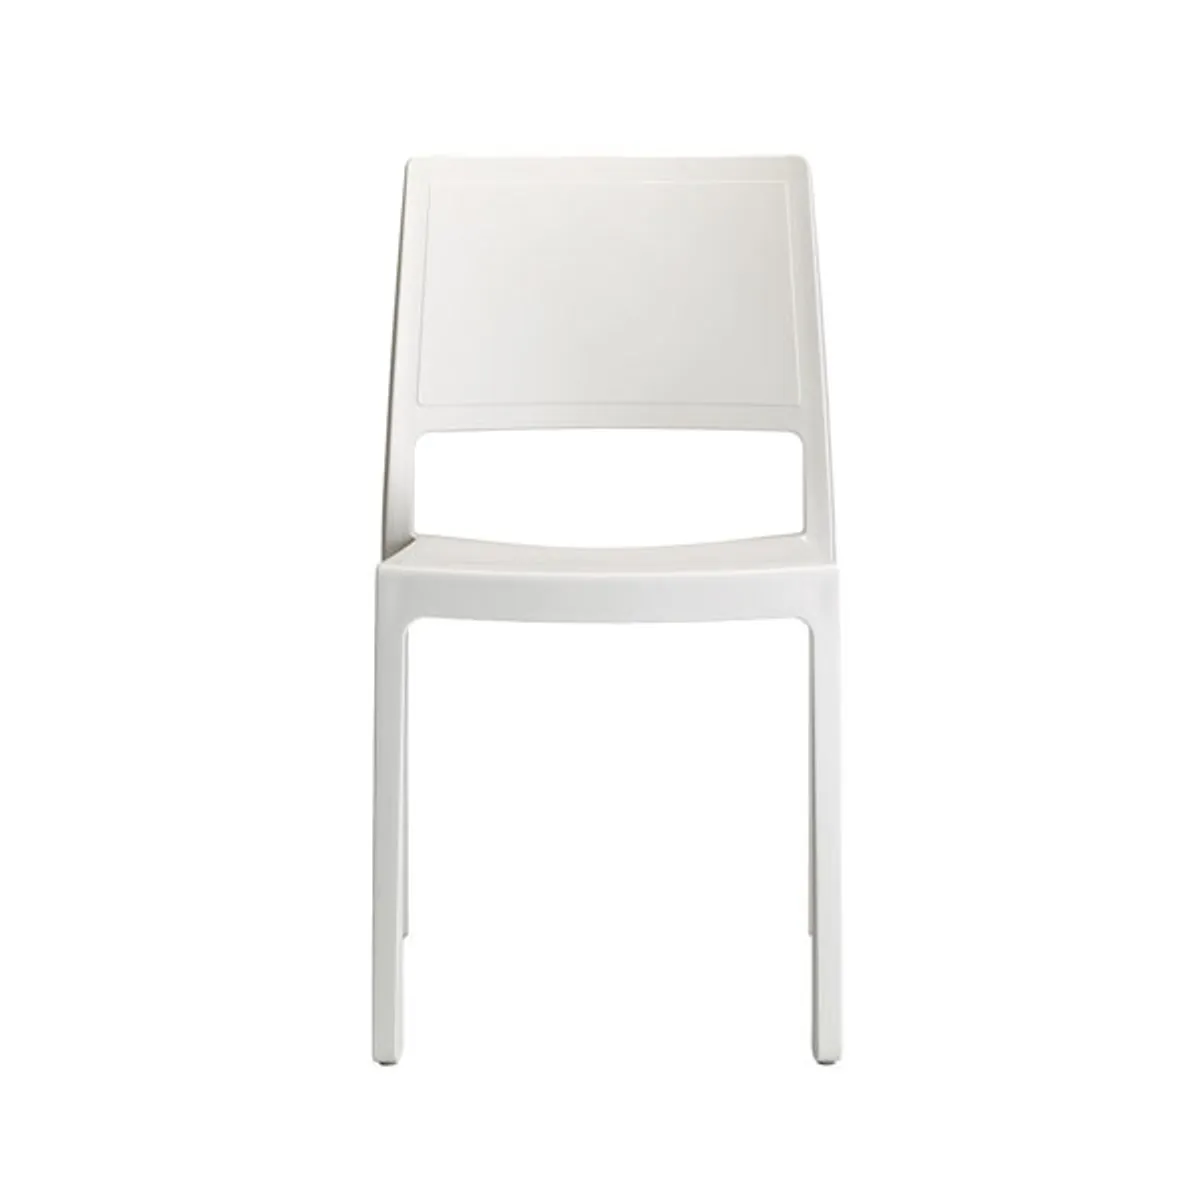 Remi side chair 8 Inside Out Contracts